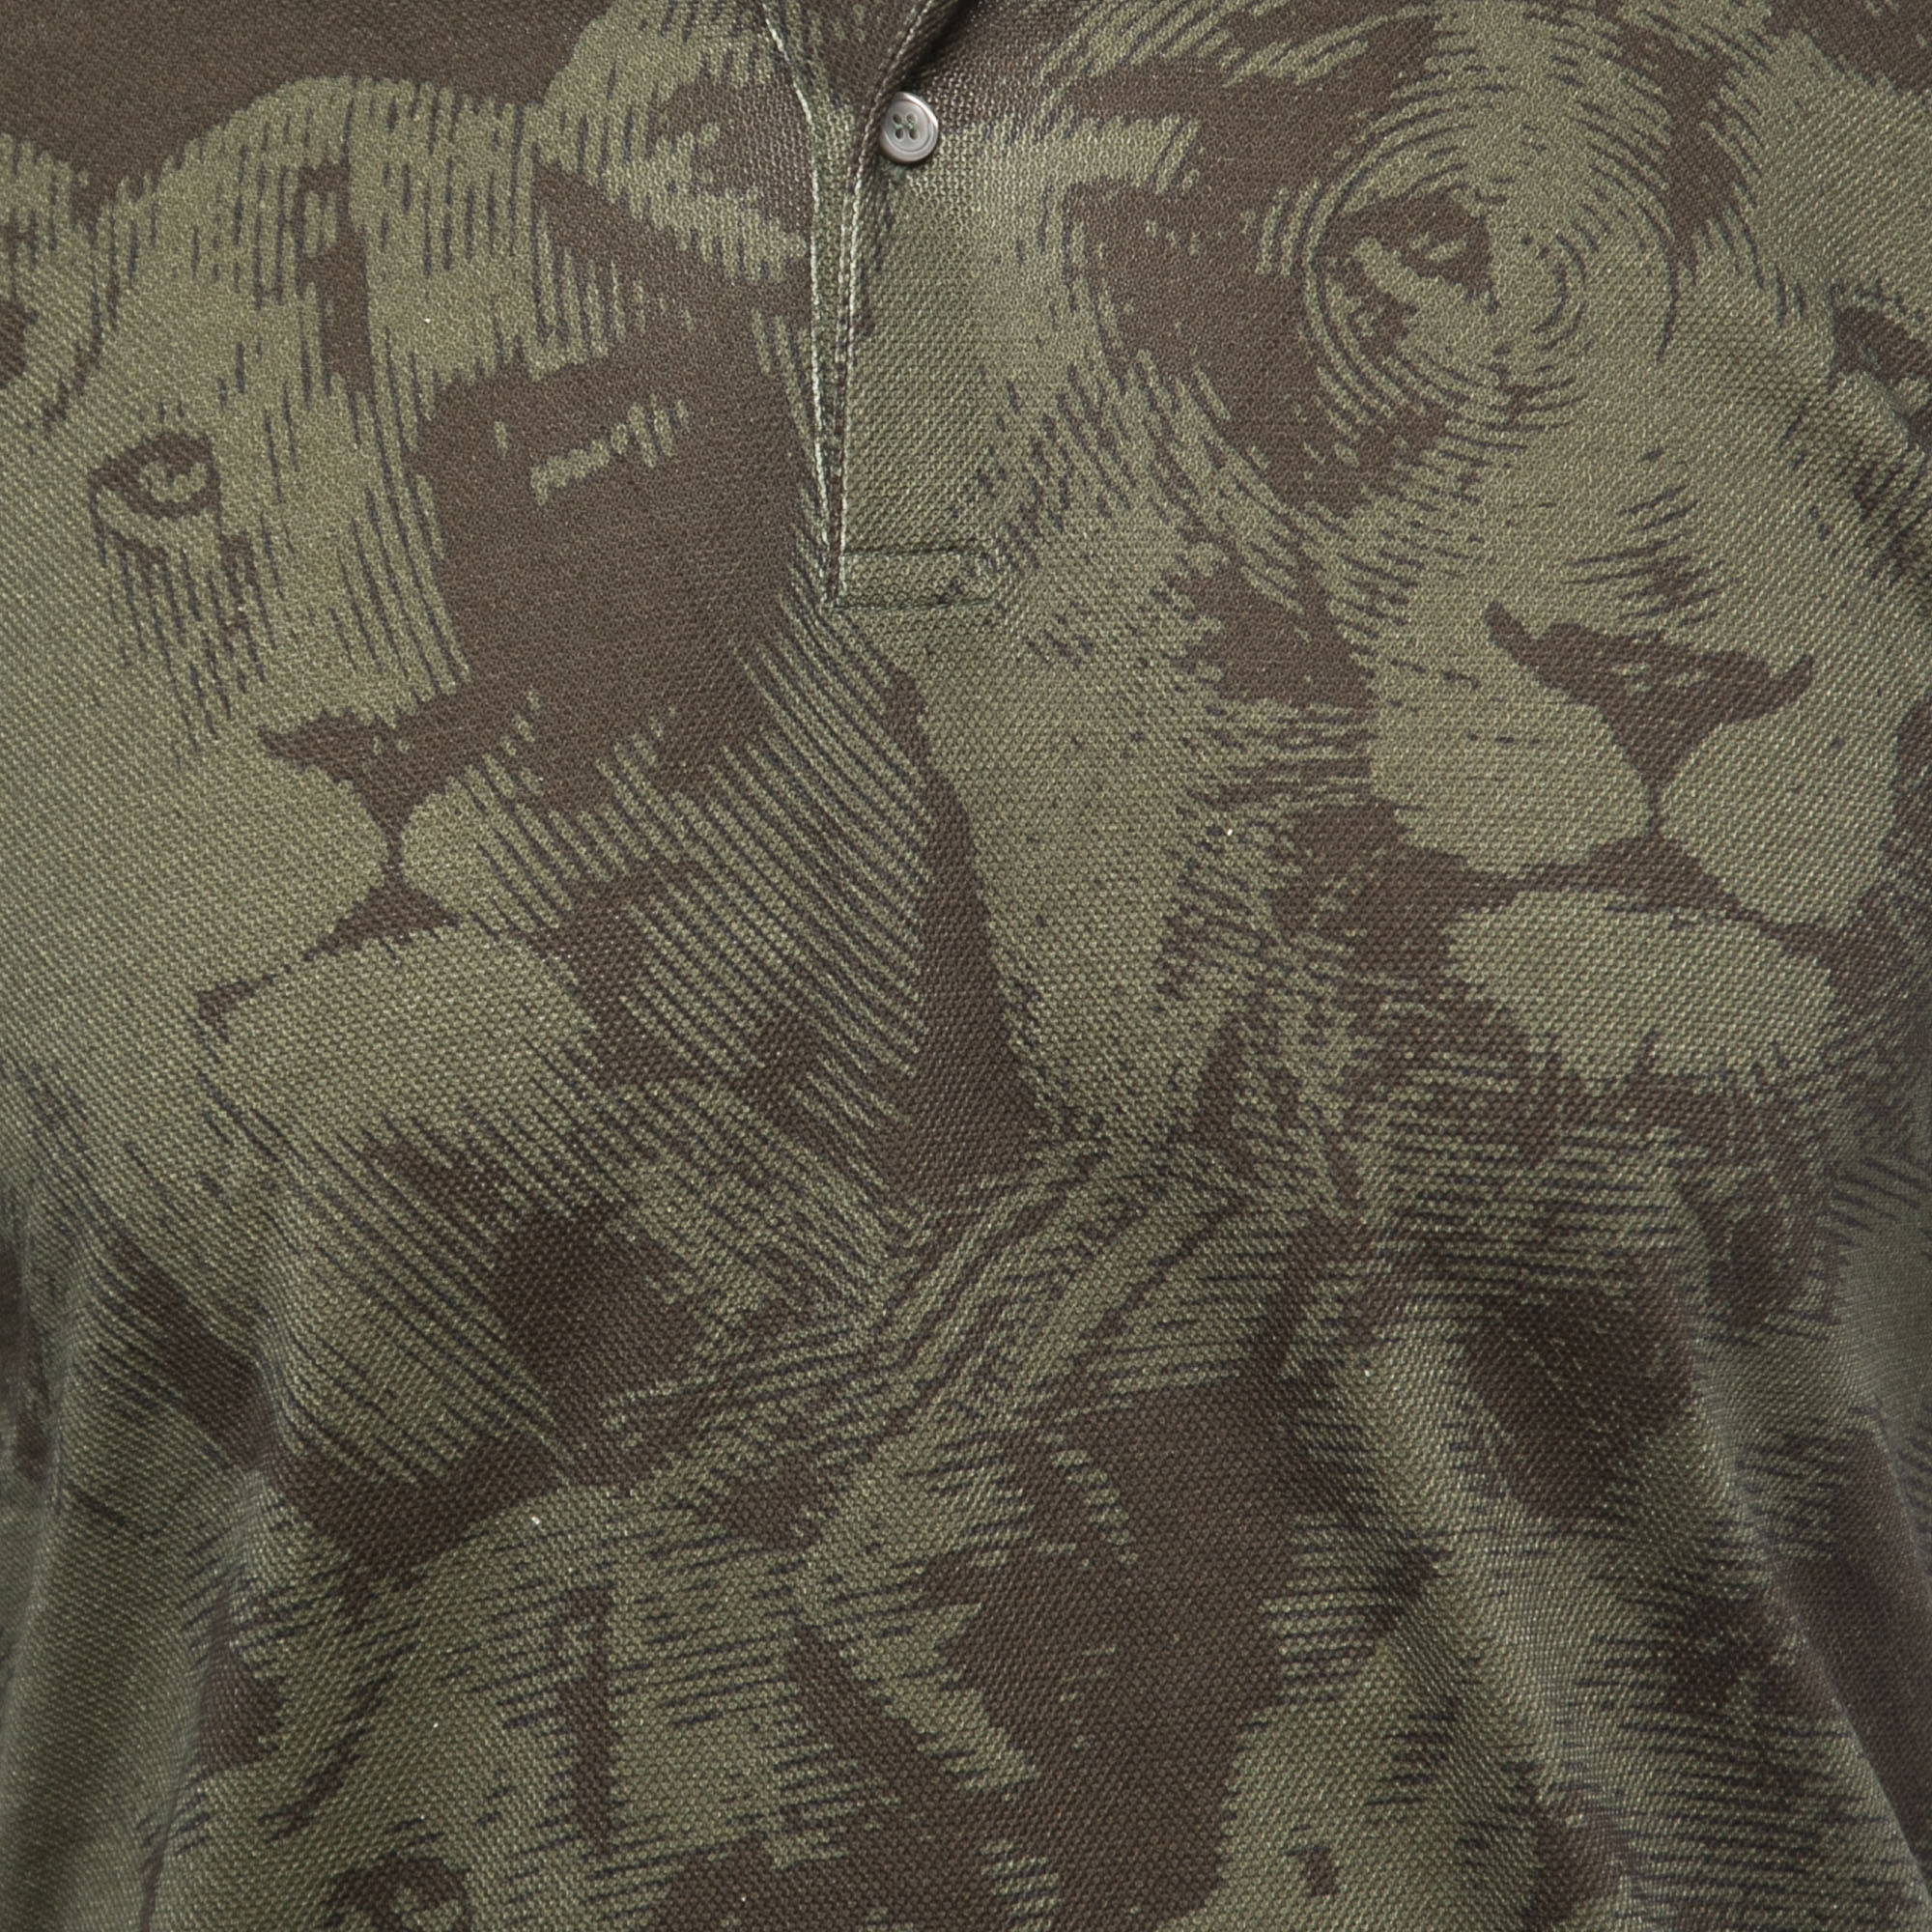 Roberto Cavalli Military Green Lion Print Cotton Leather Trimmed Polo T-Shirt S